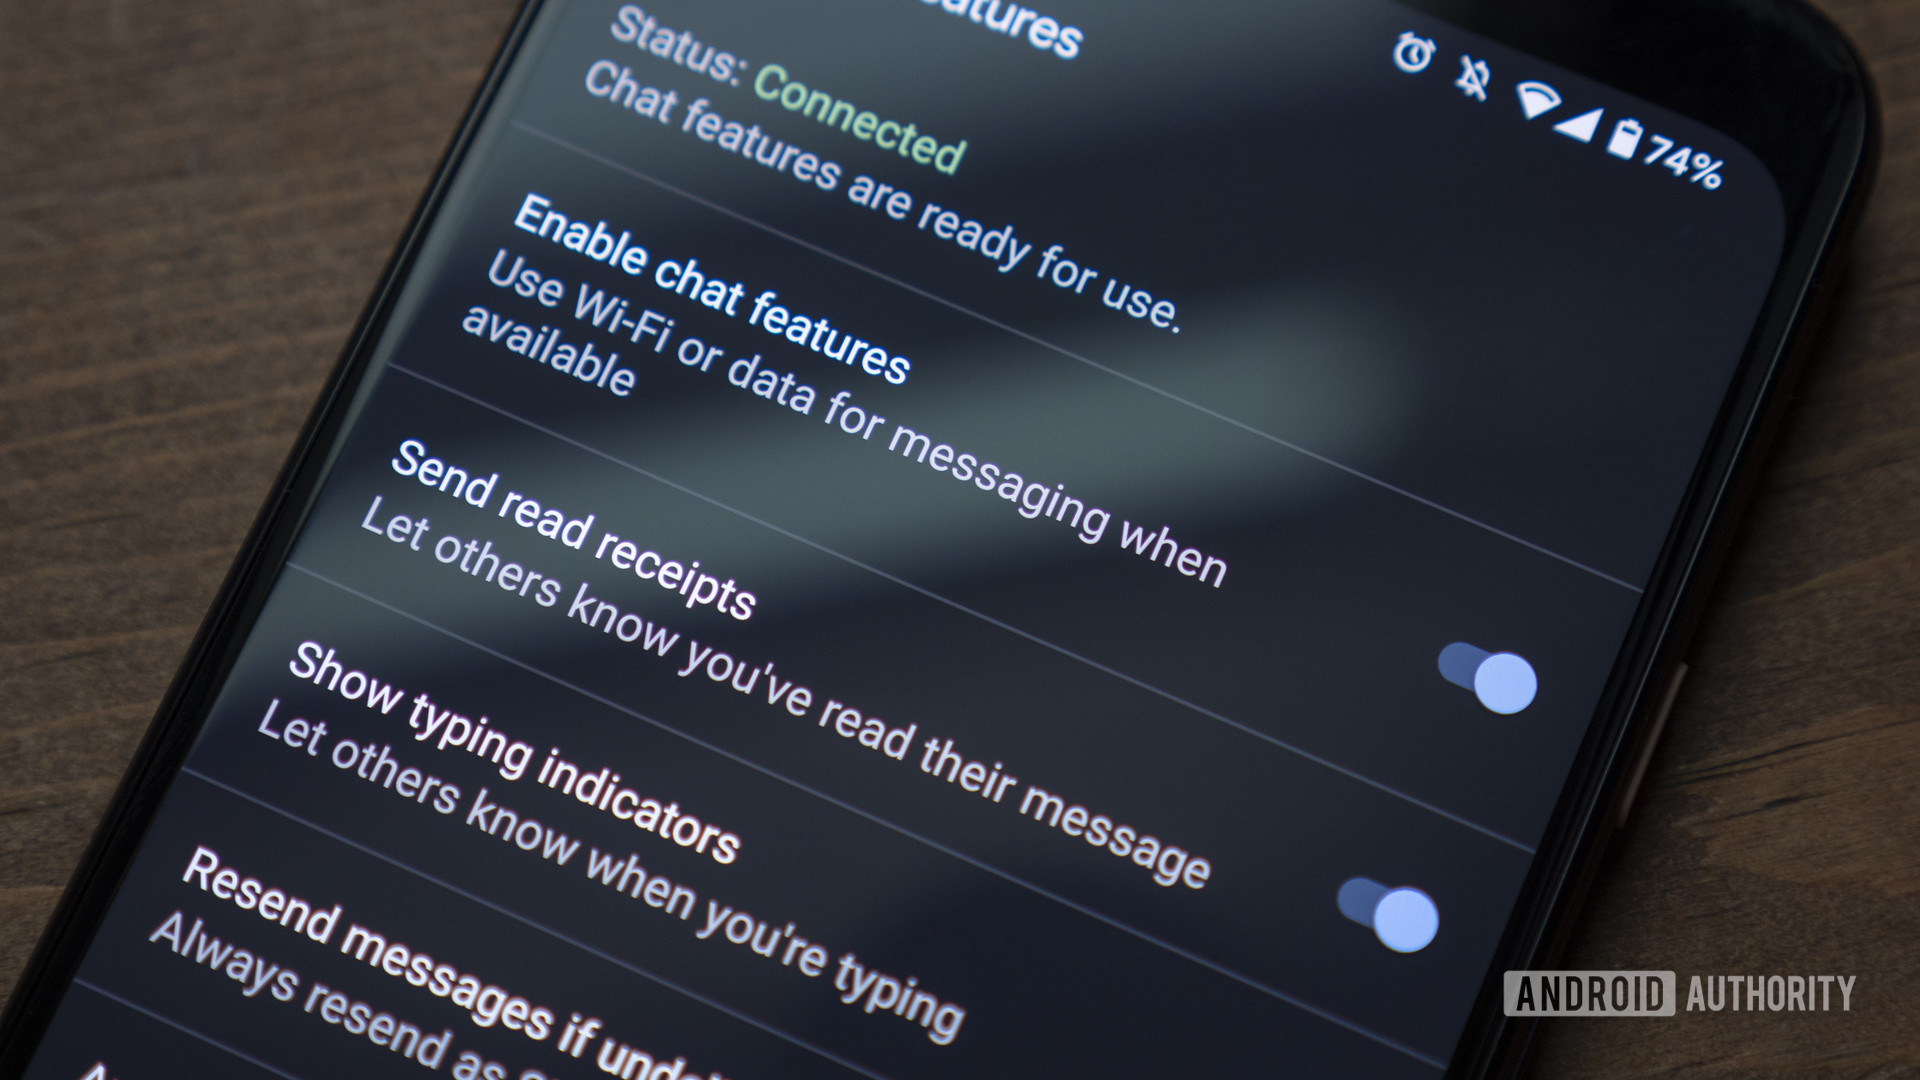 google messages chat features read receipts typing indicators rcs vs whatsapp